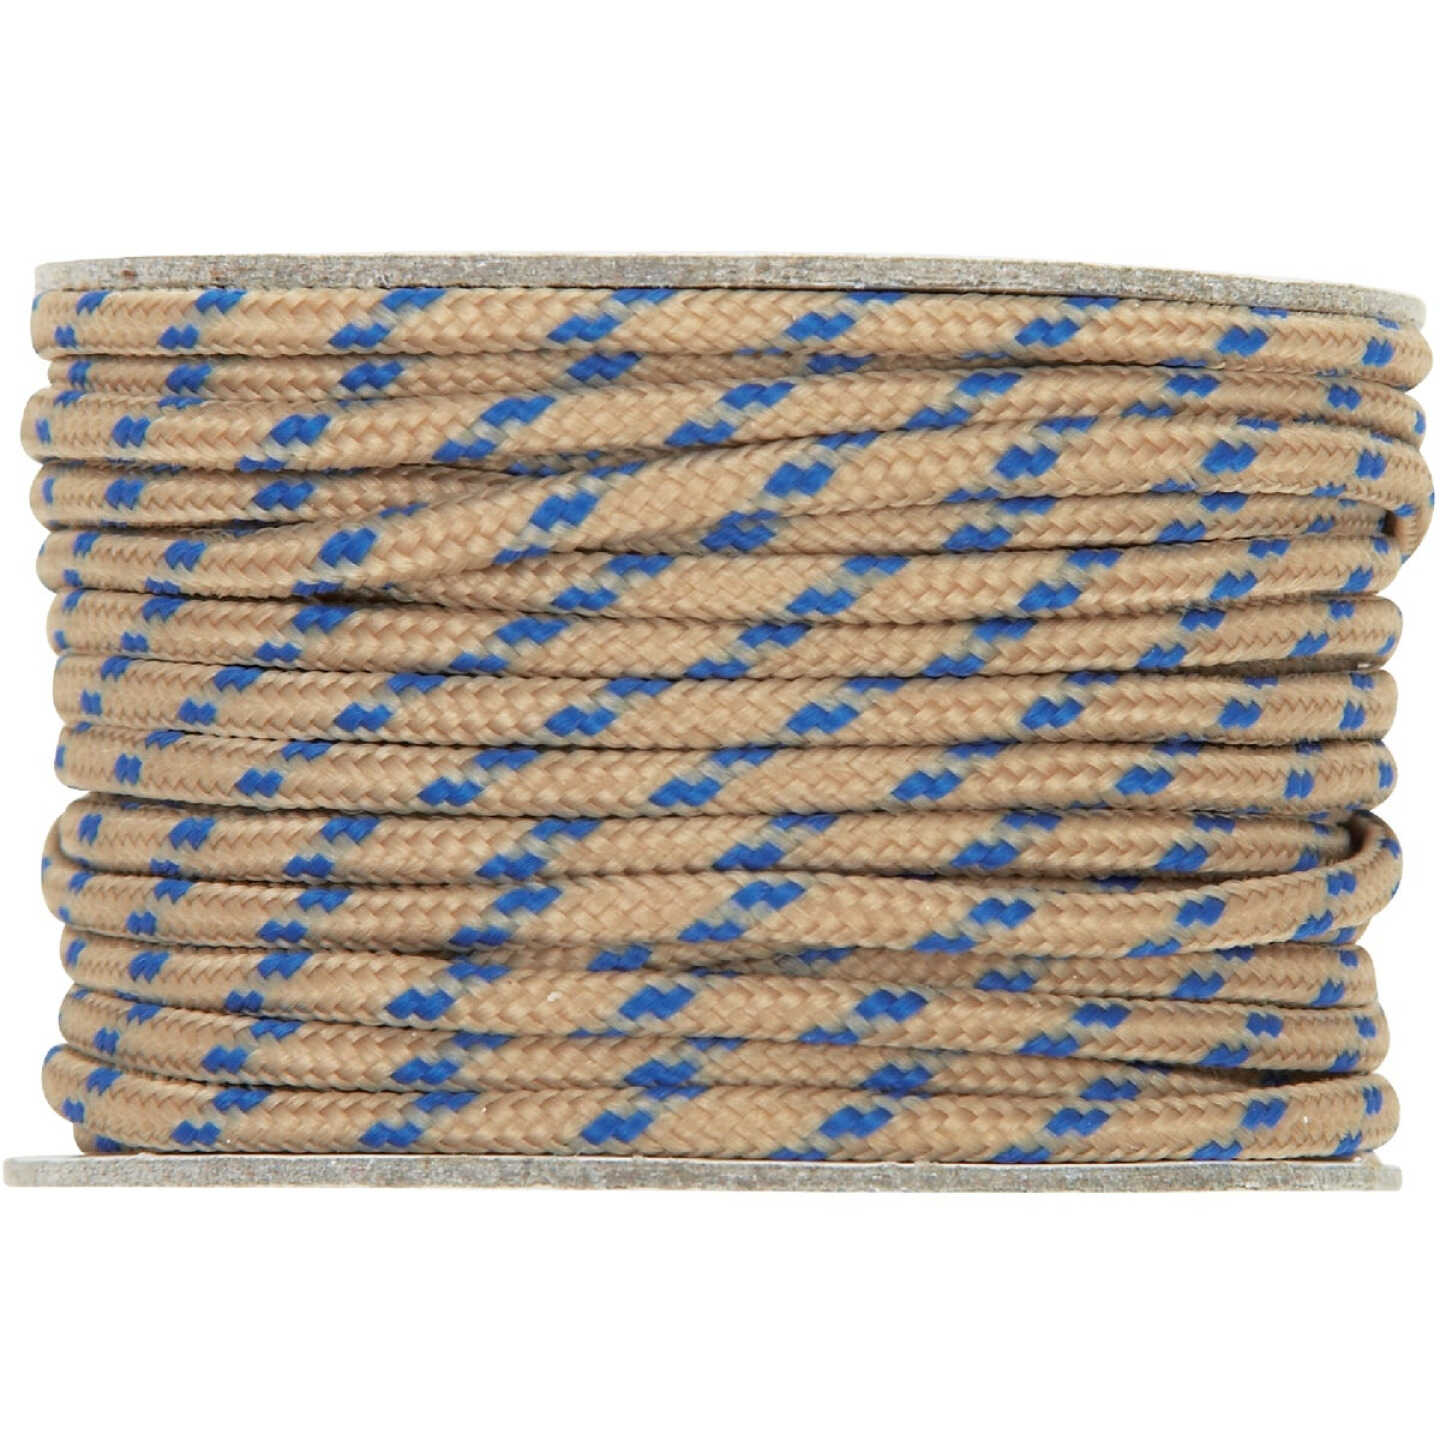 Do it Best 1/8 In. x 50 Ft. Assorted Colors Braided Sportsman Polypropylene Packaged Rope Image 1